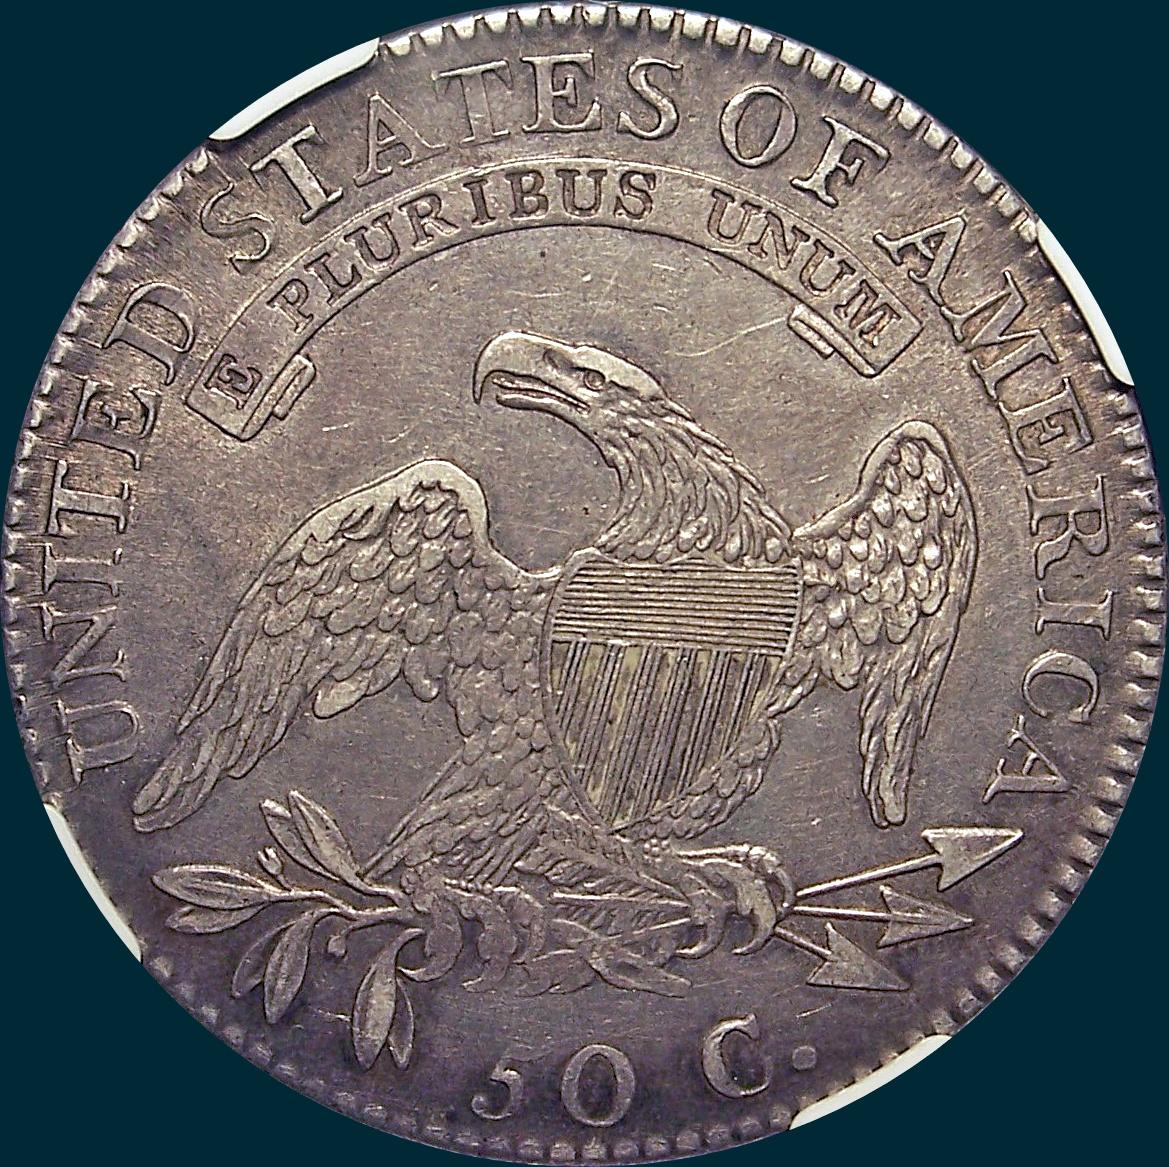 1818, O-102, 8 over 7, Small 8, Capped Bust, Half Dollar